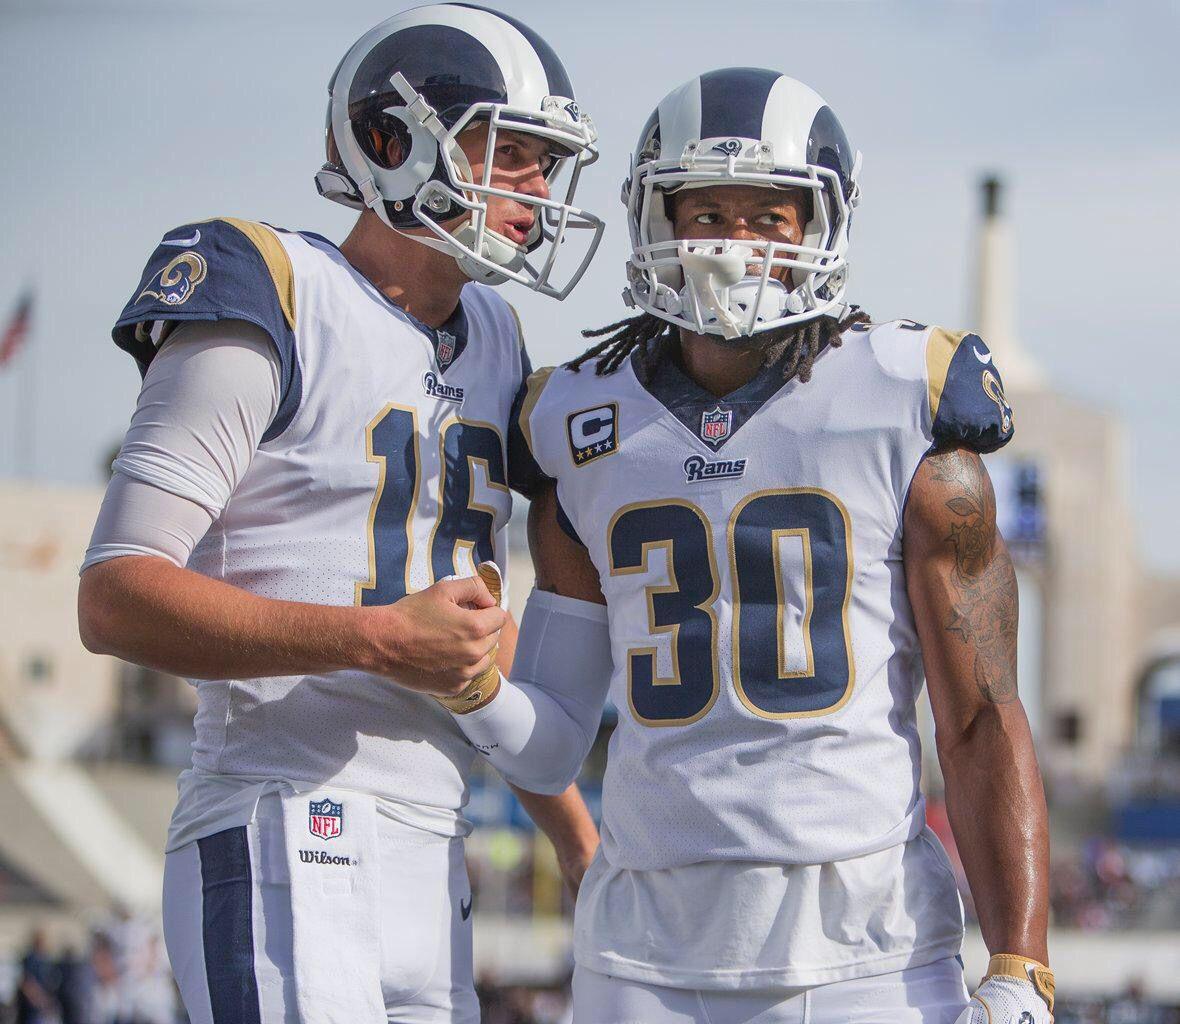 Jared Goff and Todd Gurley. NFL. Jared goff, Nfl rams